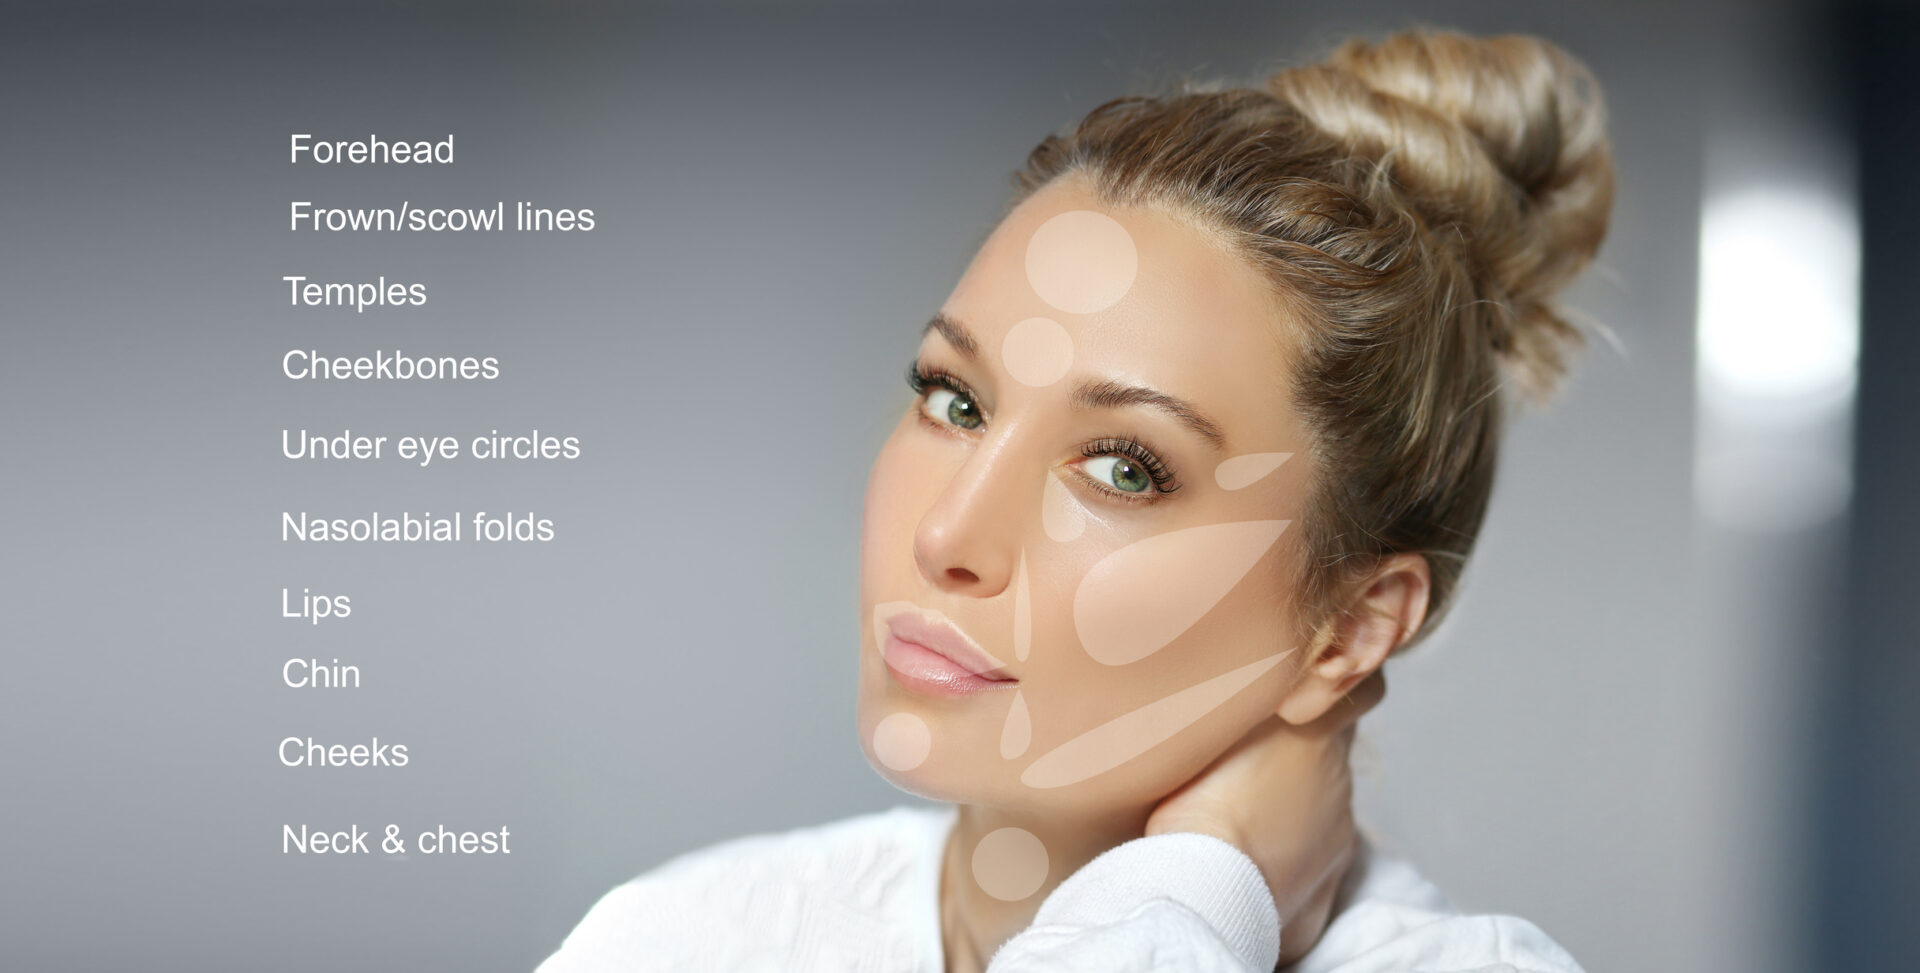 dermal filler treatments .Hyaluronic acid injections for specific areas.Correct wrinkles